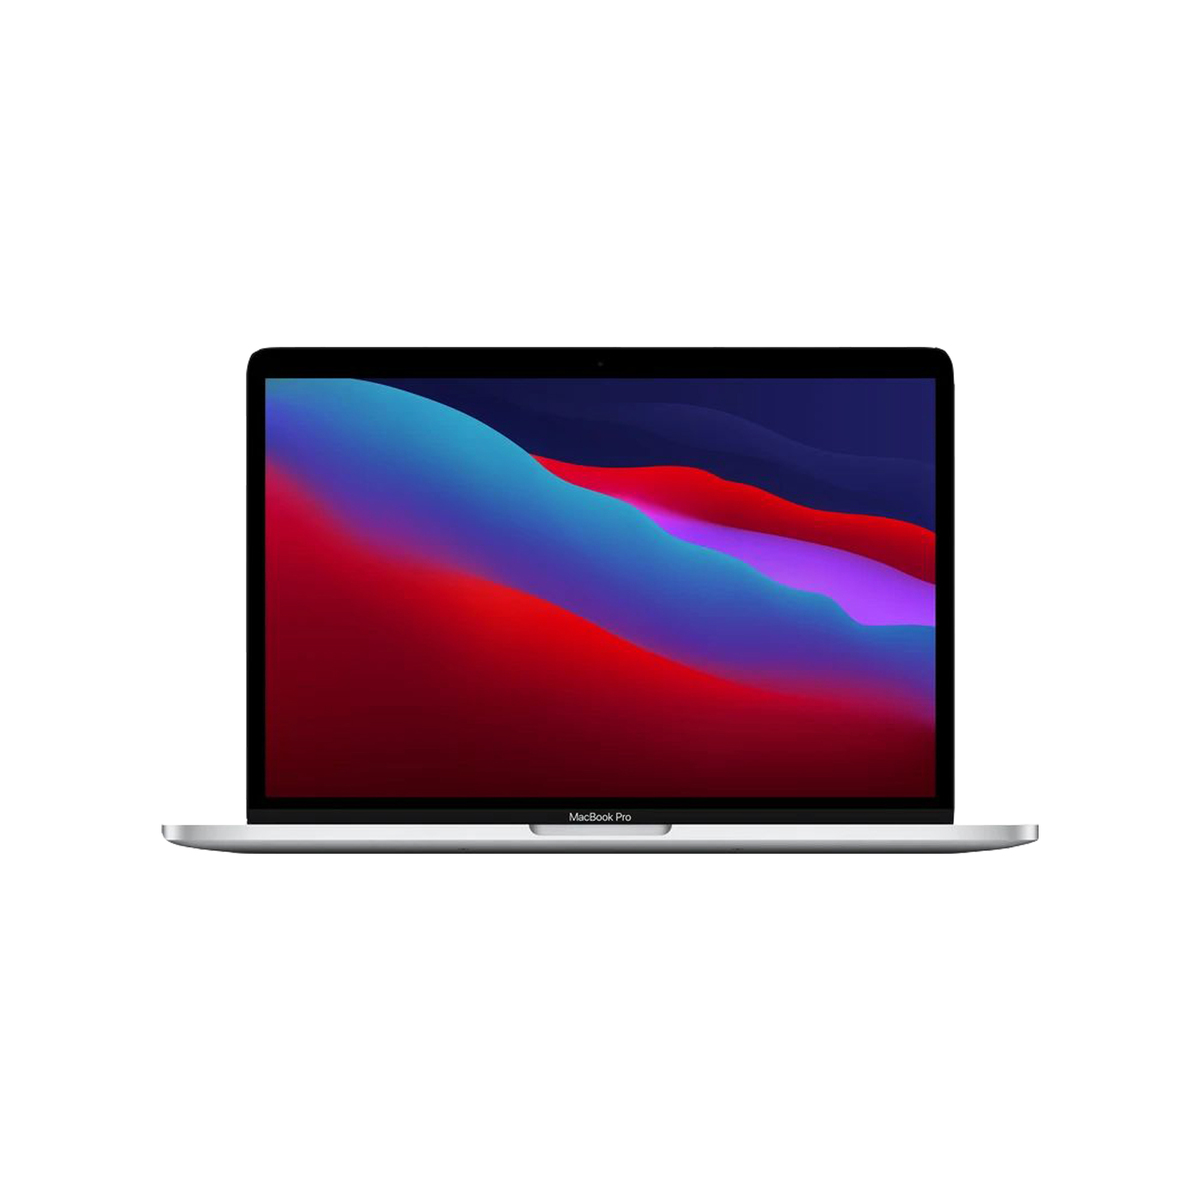 Apple MacBook Pro 13"(MYD92AB/A), Apple M1 chip with 8‑core CPU and 8‑core GPU, 512GB SSD - Space Grey